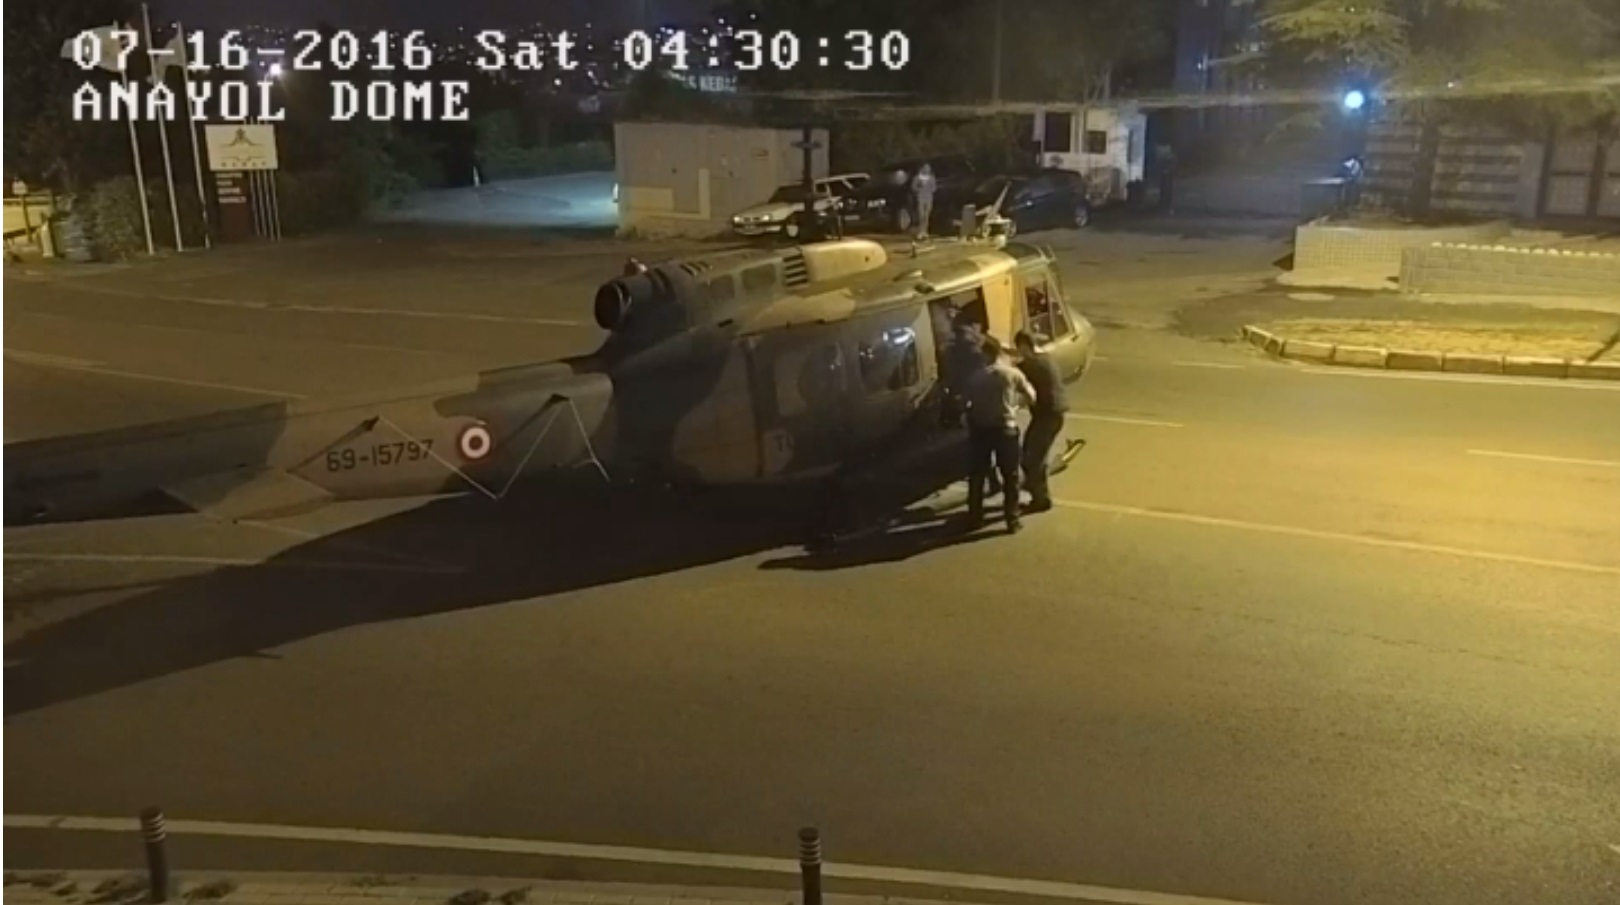 Realizing that the coup attempt would fail, helicopters landed to help commissioned officers escape.